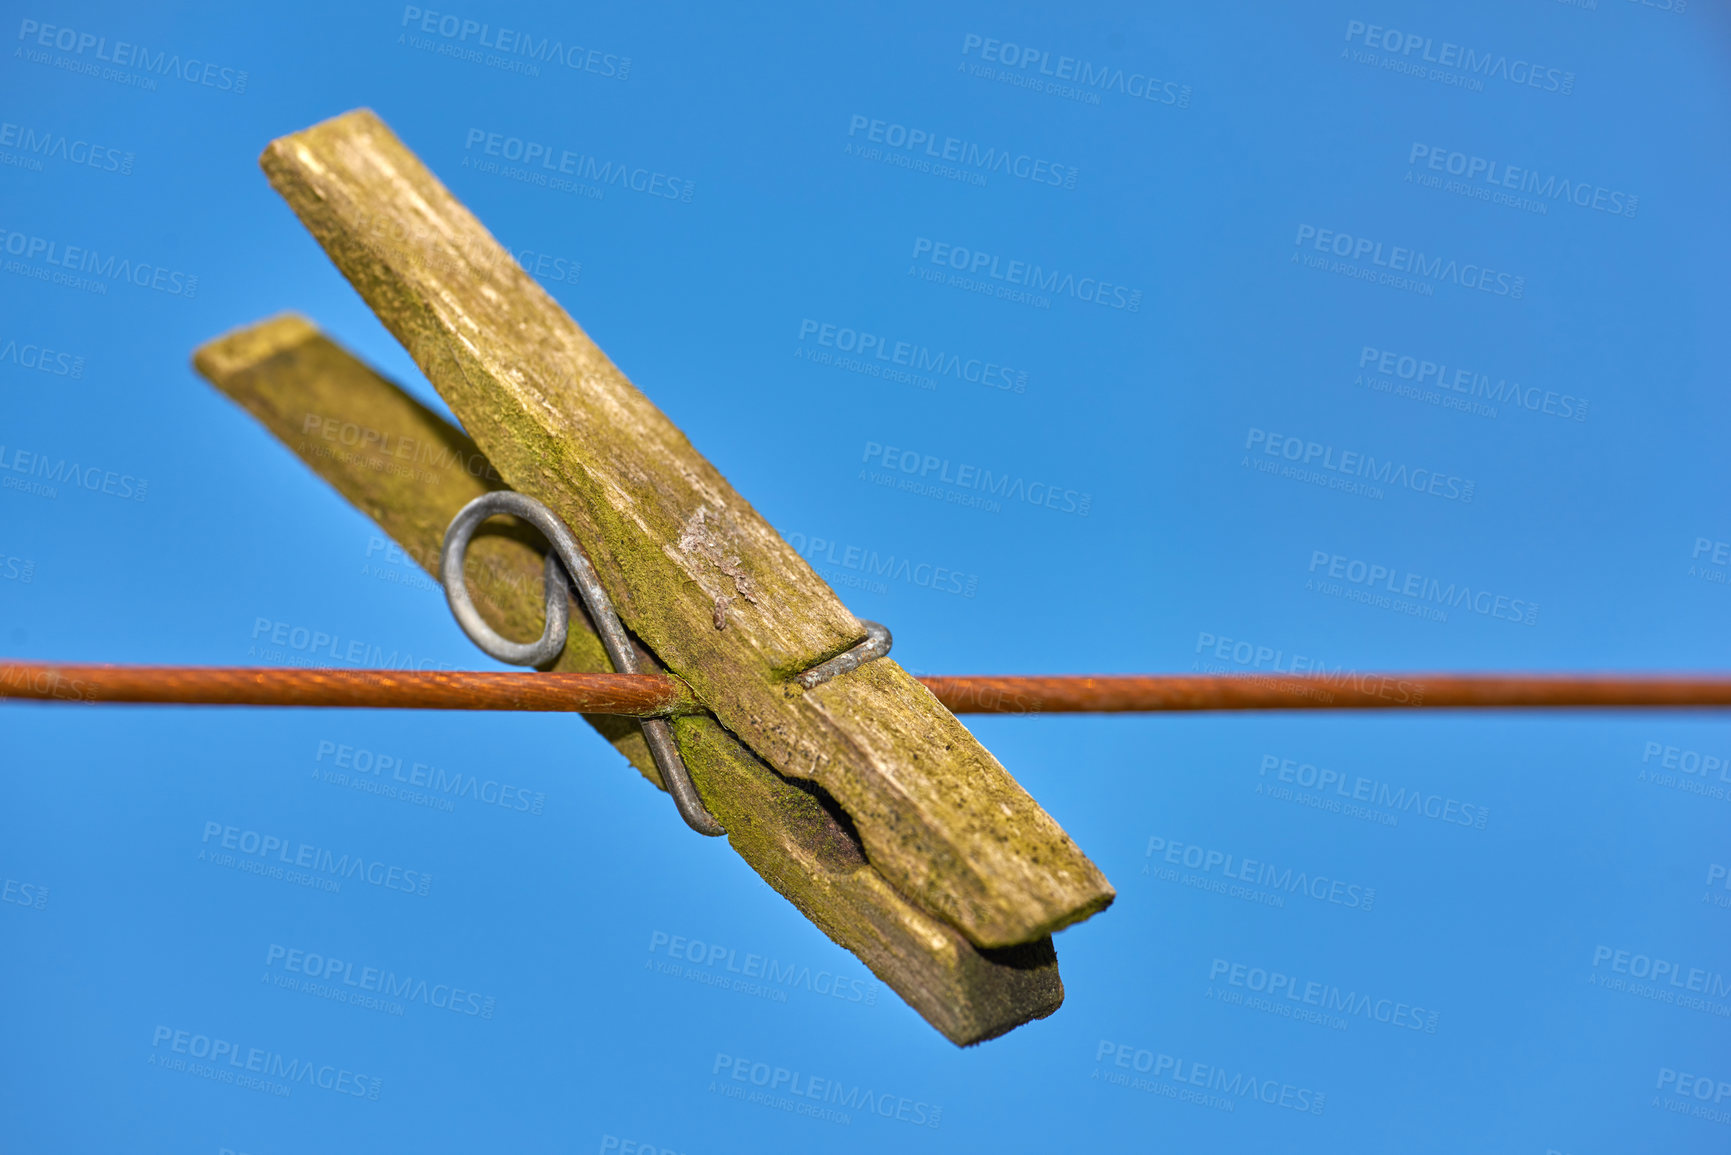 Buy stock photo An old peg on a clothing line outdoors against blue sky copy space background. Closeup details a weathered wooden clothespin used as household objects for a tradition clothing drying on laundry day